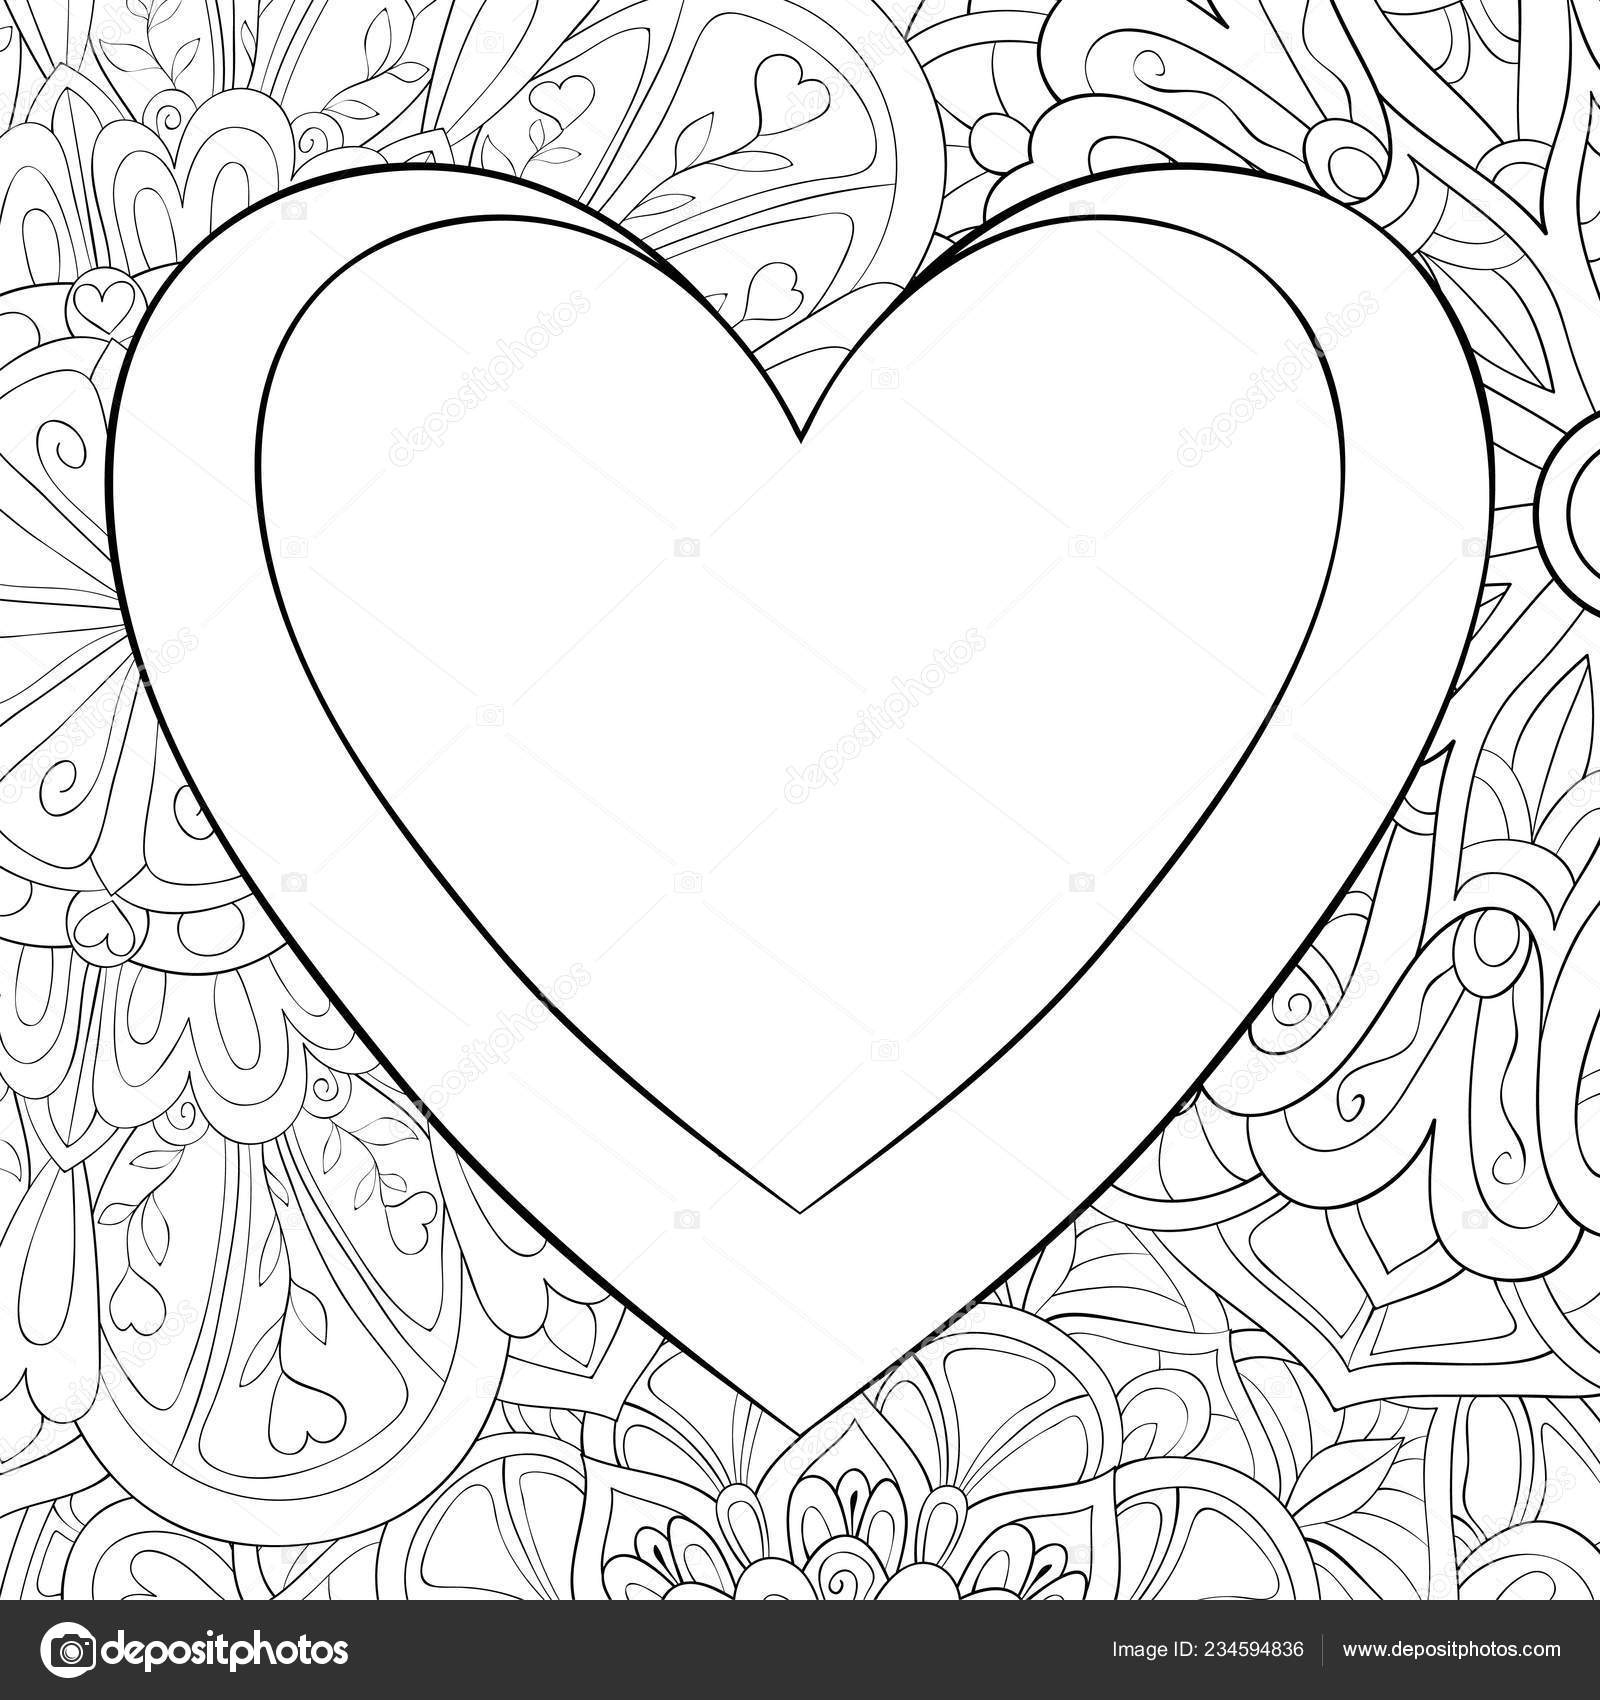 Adult coloring bookpage a cute heart Royalty Free Vector